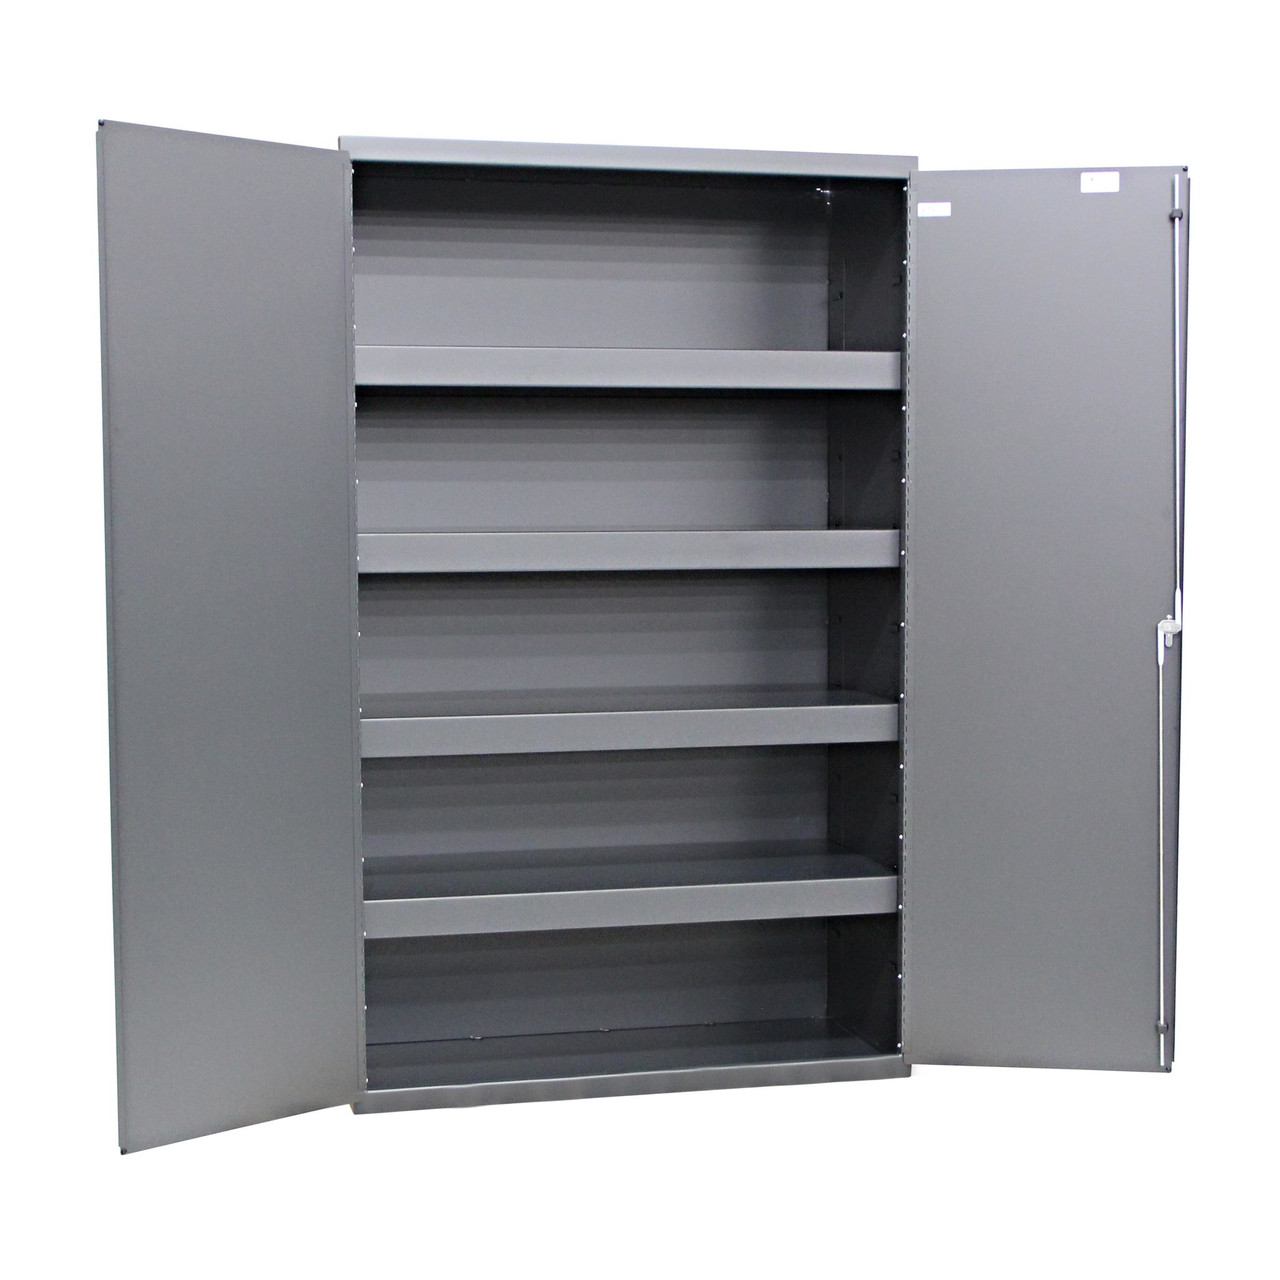 Valley Craft Heavy Duty Steel Cabinet 36 x 24 x 84", Smoke Gray(CALL FOR BEST PRICING)